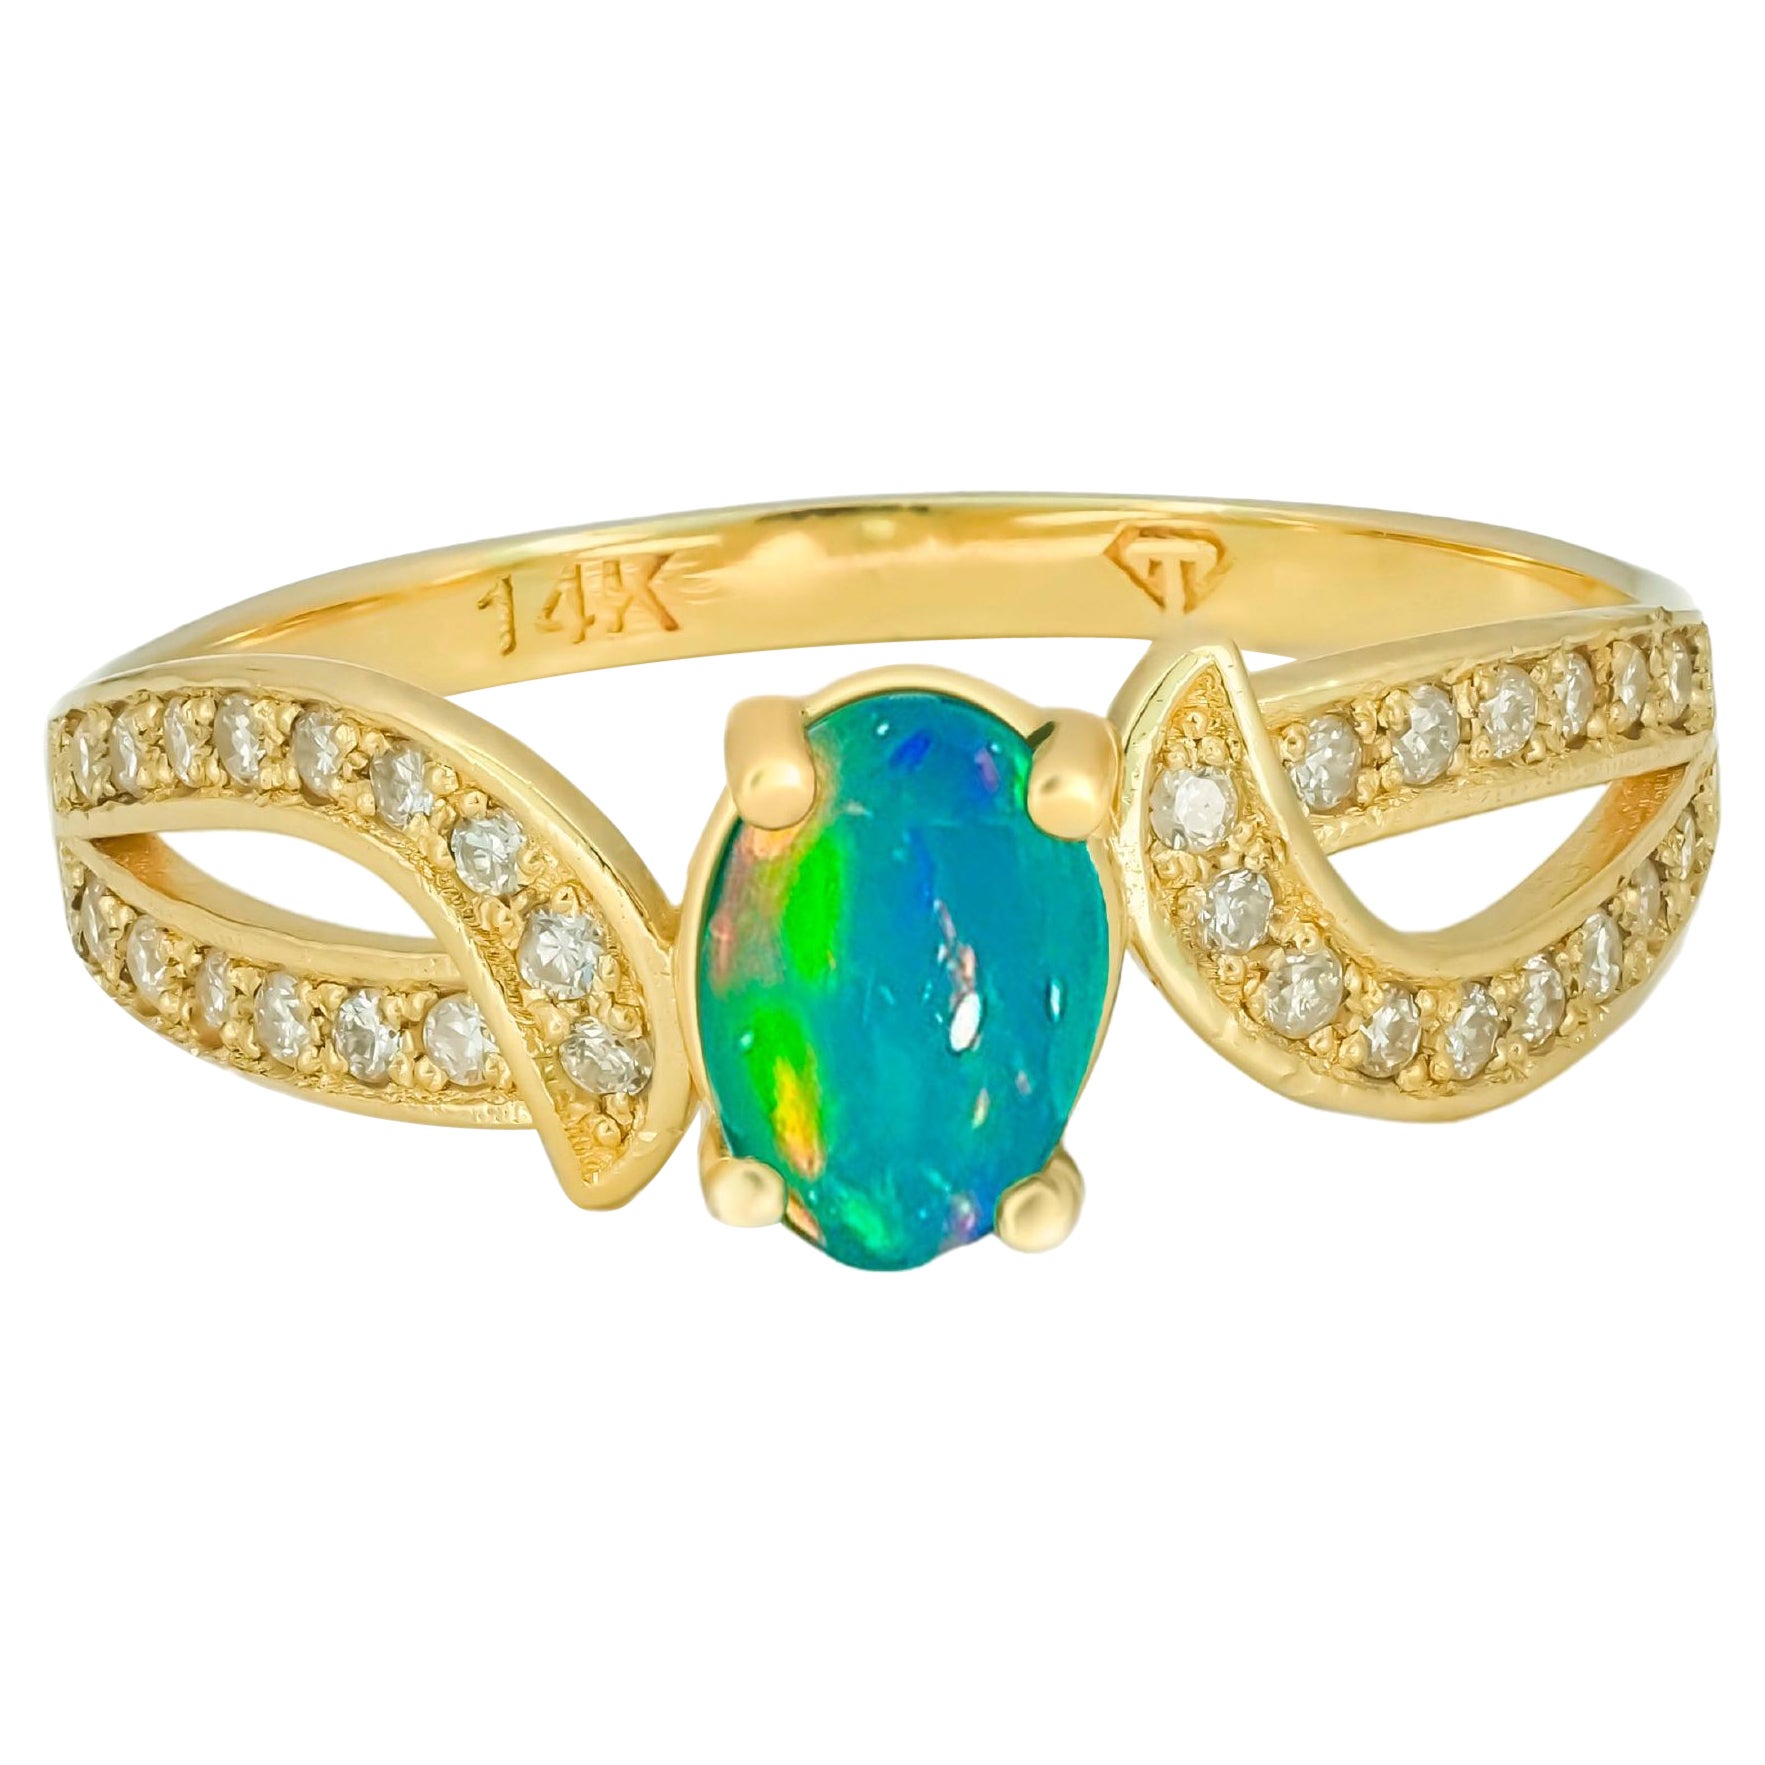 For Sale:  Genuine Opal 14k Gold Ring.